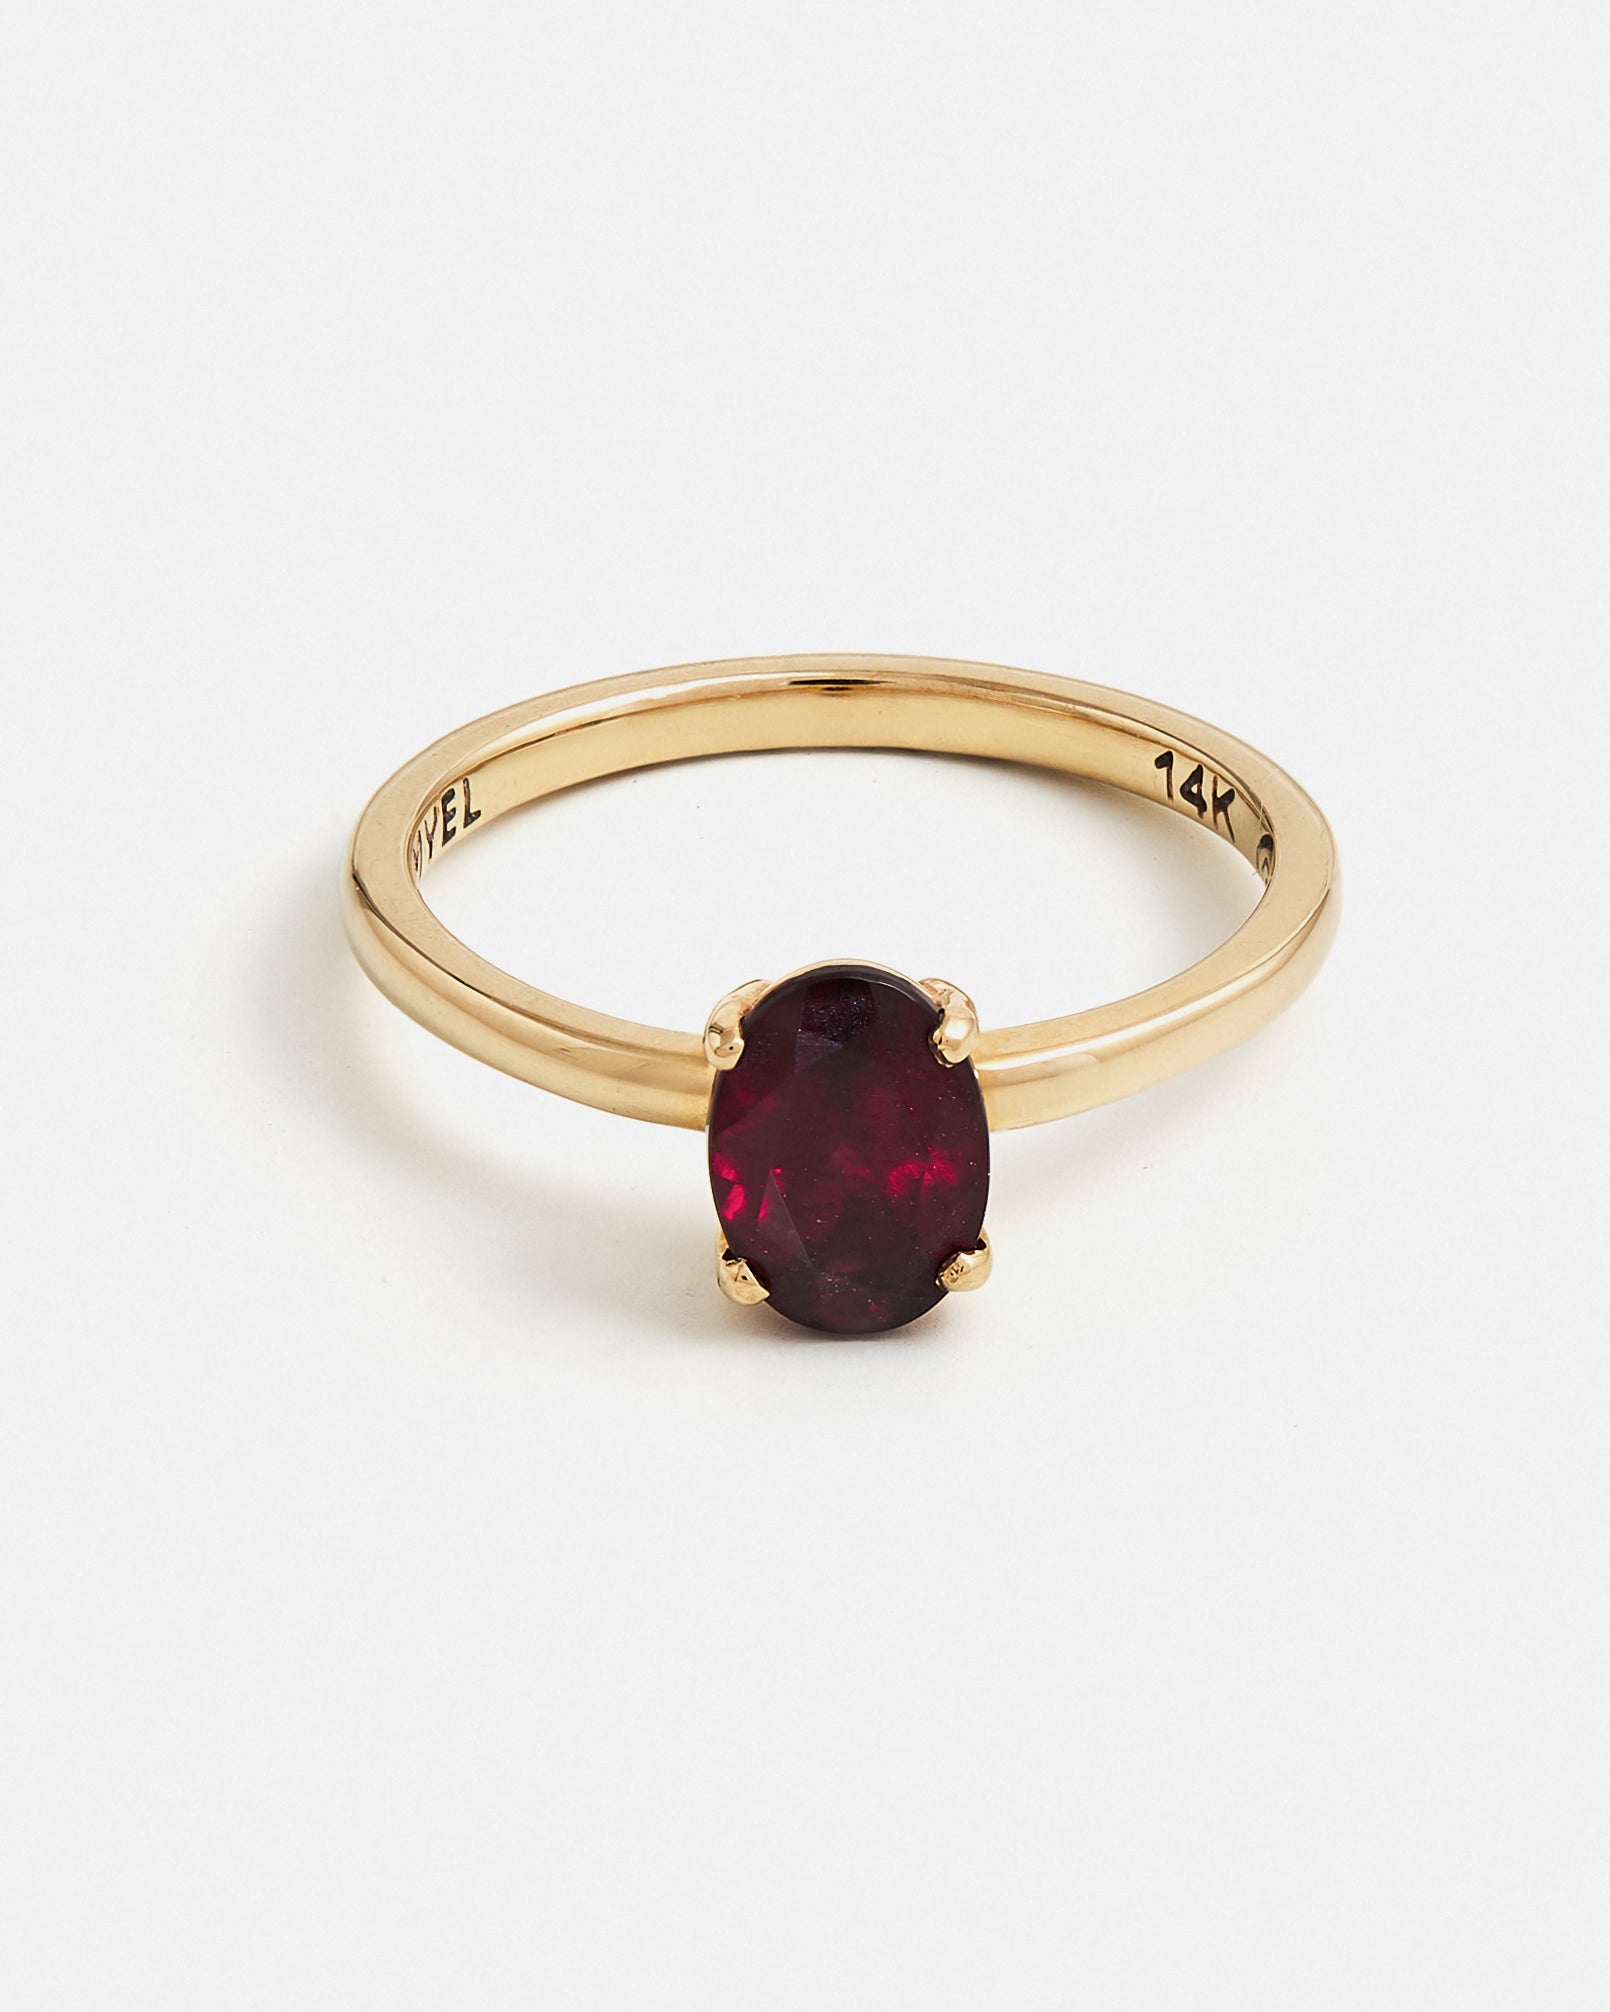 Ellipse Ring in Fairmined Gold with Anthill Garnet